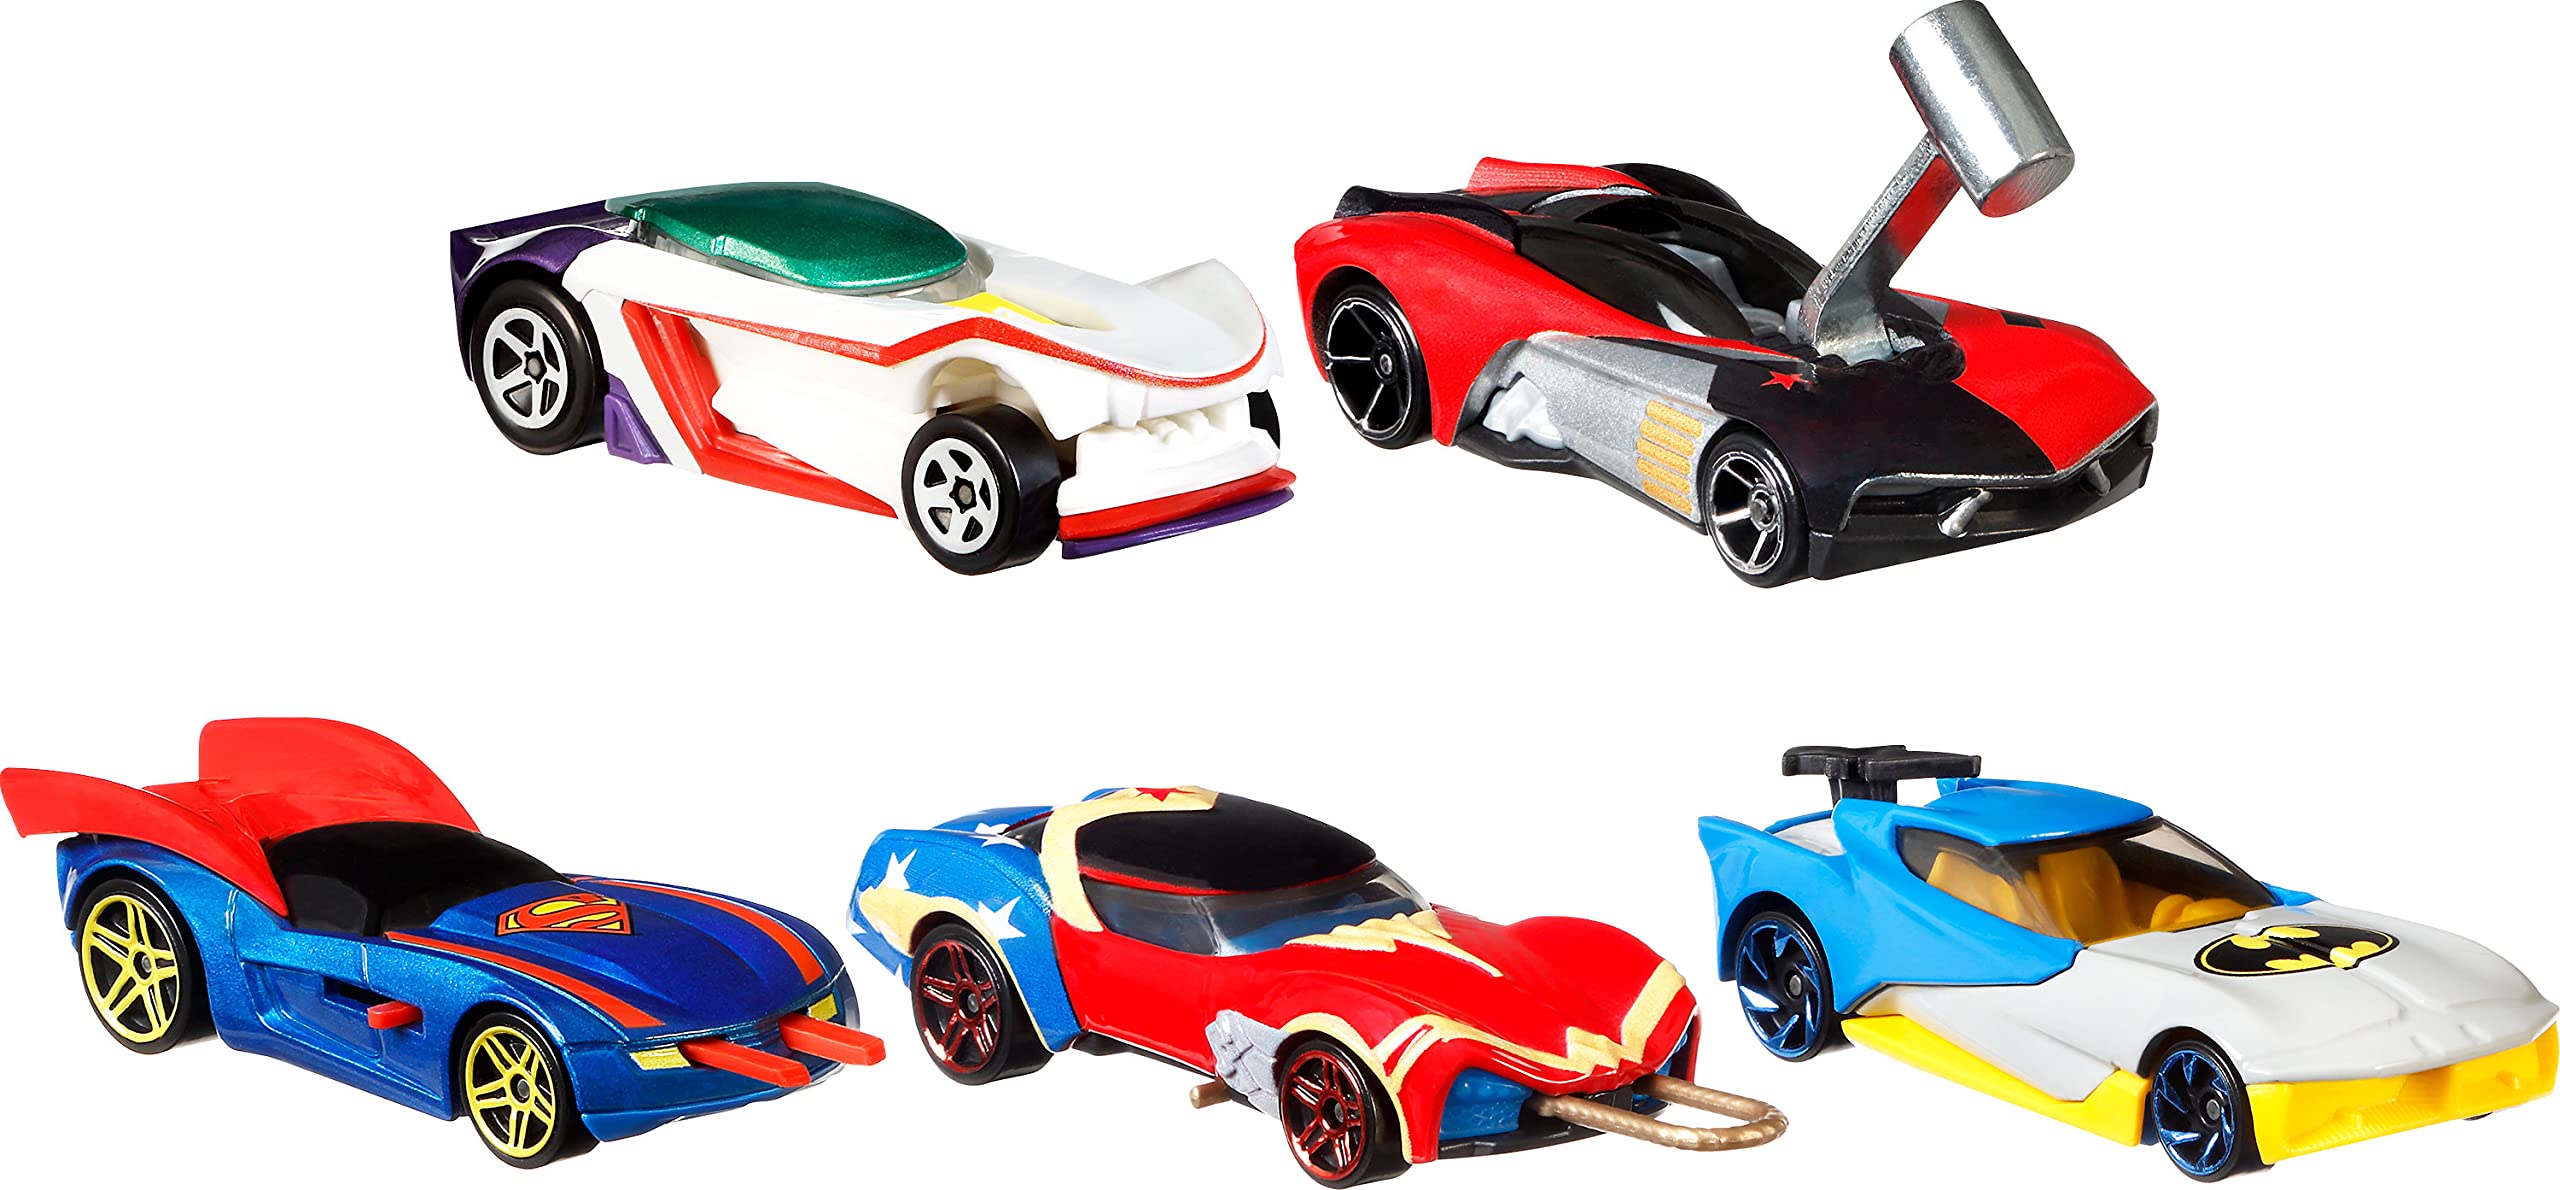 Mua Hot Wheels DC Character Cars 5-Pack of 1:64 Scale Collectible Vehicles  Themed to Superman, Batman, Wonder Woman, The Joker GT and Harley Quinn,  Gift for Collectors & Kids [Amazon Exlclusive] trên